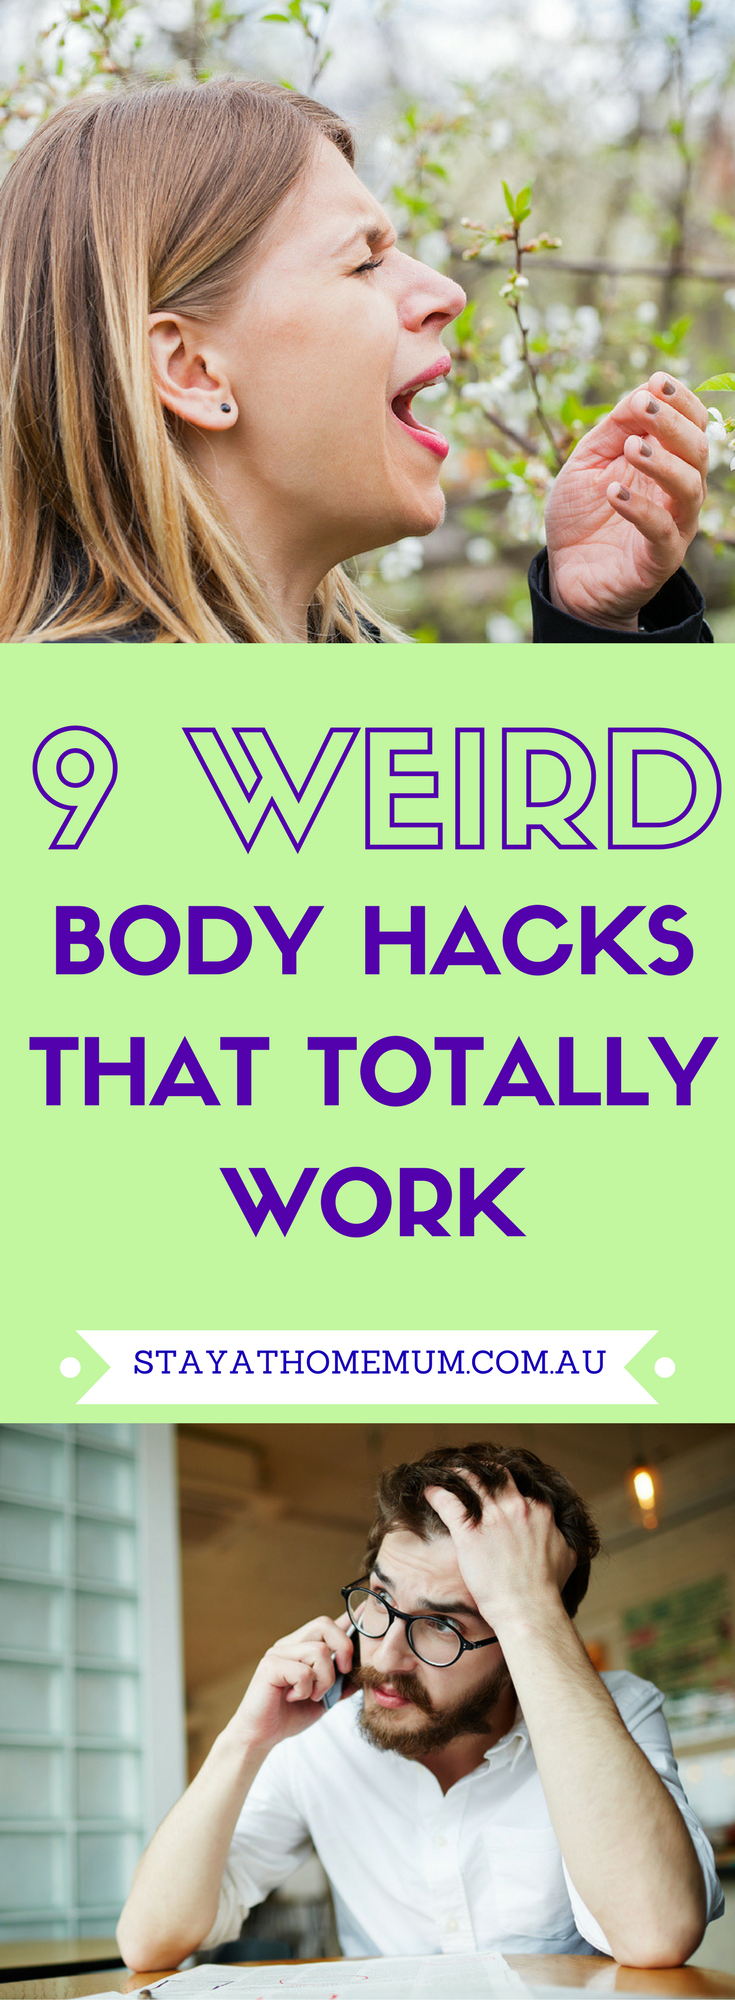 9 Weird Body Hacks That Totally Work | Stay At Home Mum